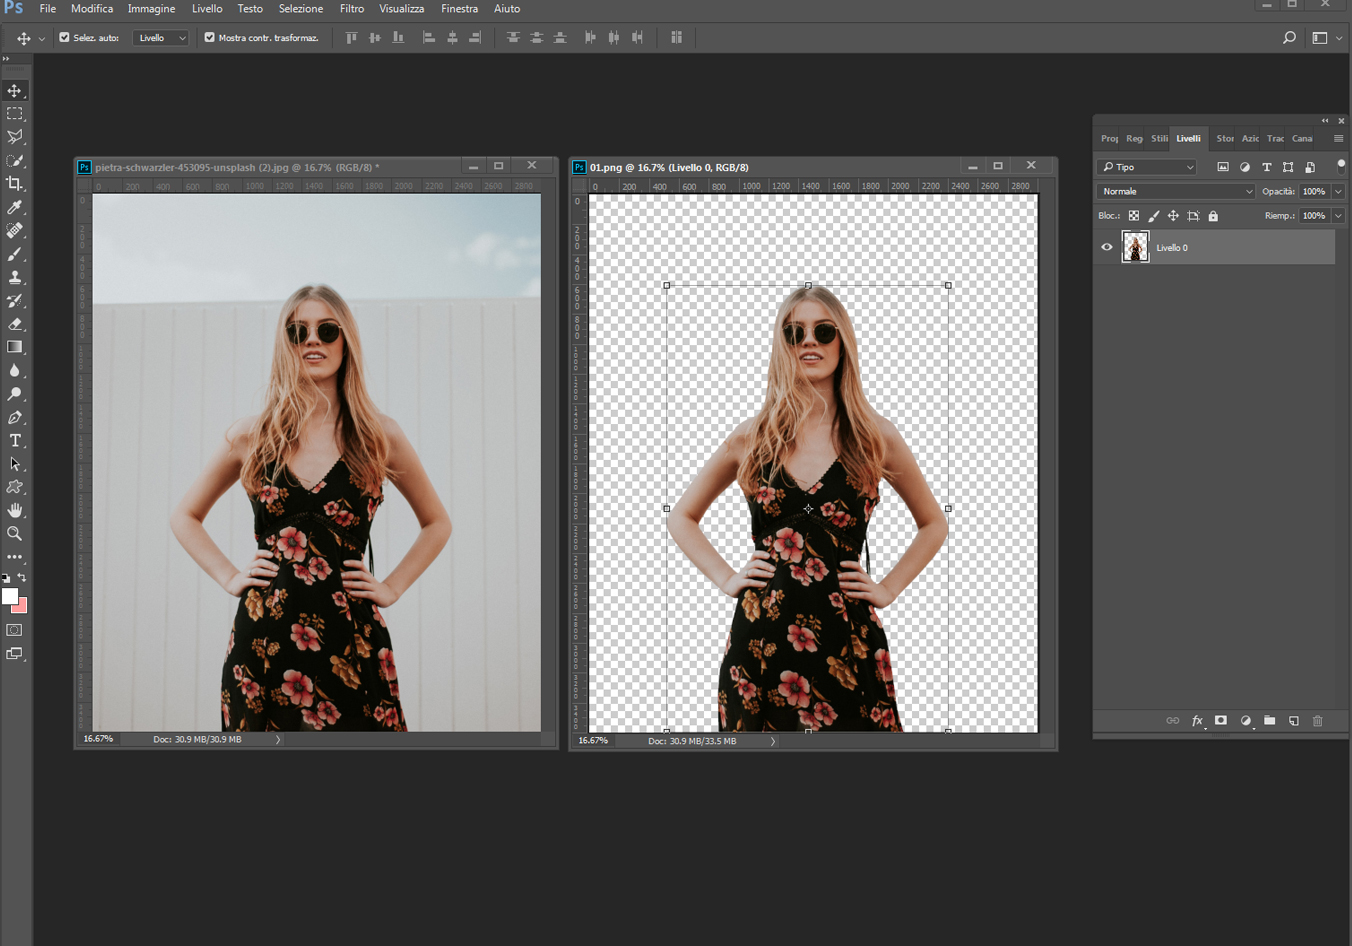 How to Remove the Background of an Image in Photoshop